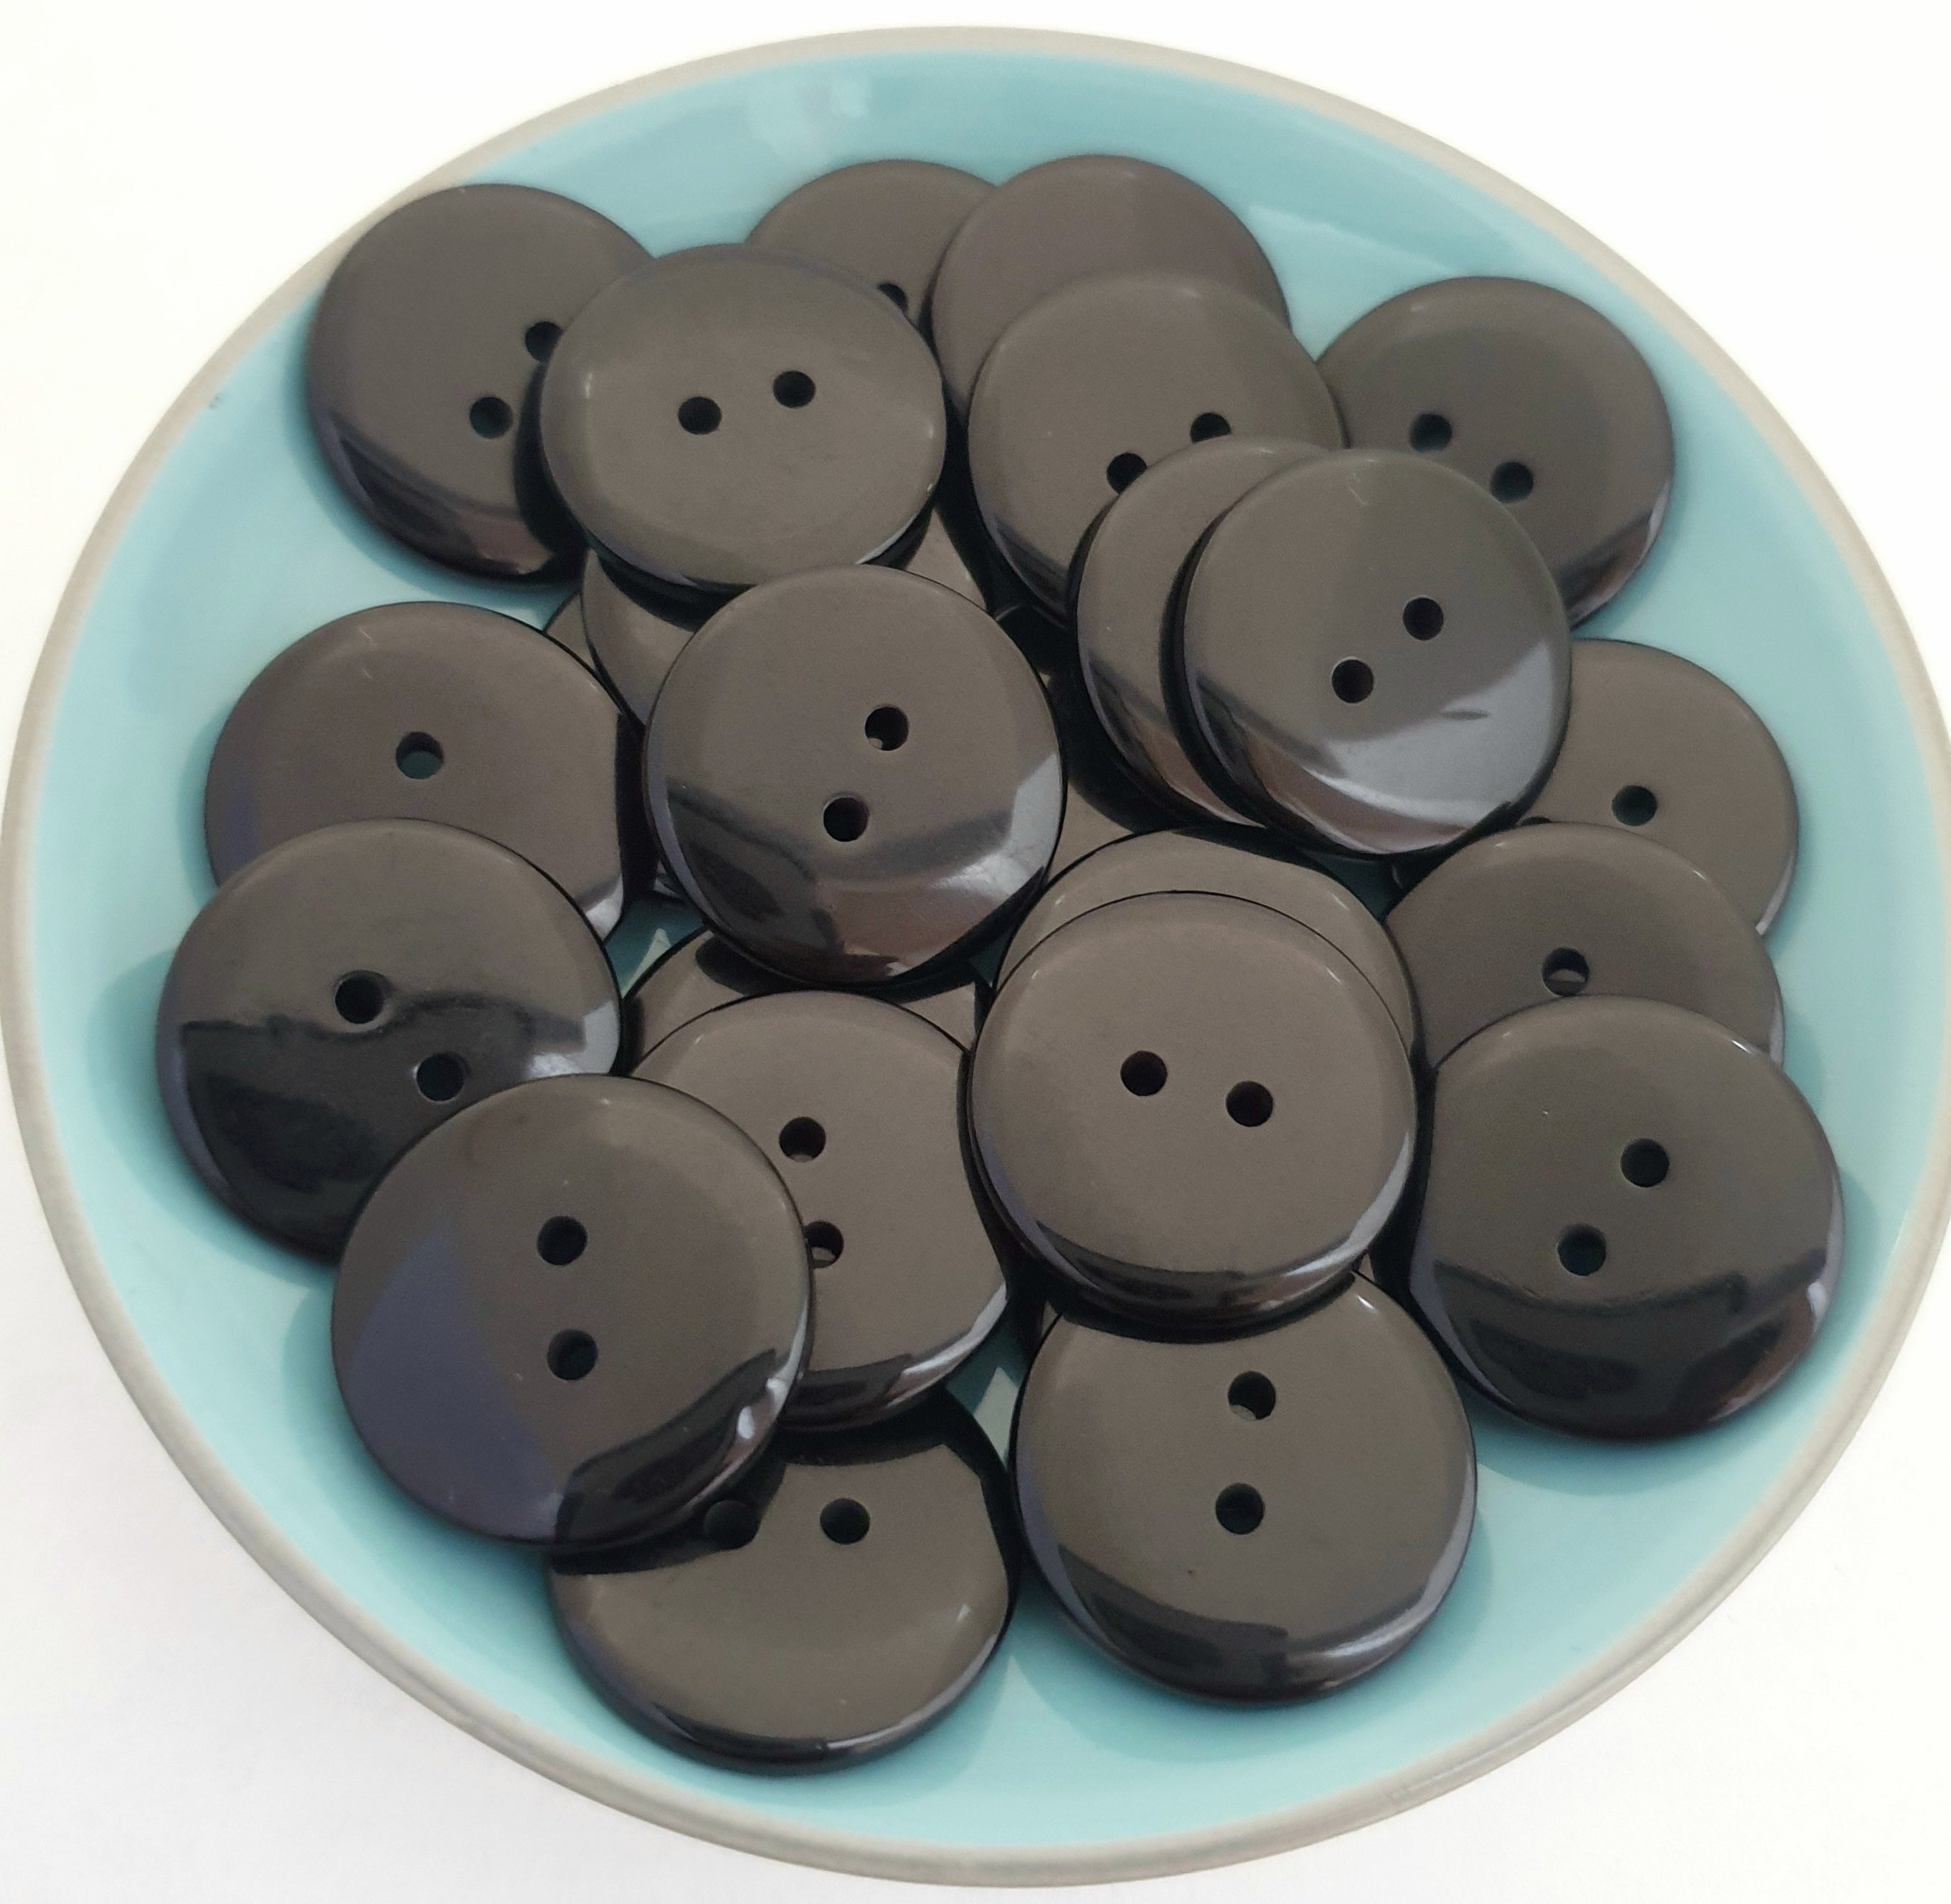 MajorCrafts 24pcs 23mm Black 2 Holes Round Large Resin Sewing Buttons